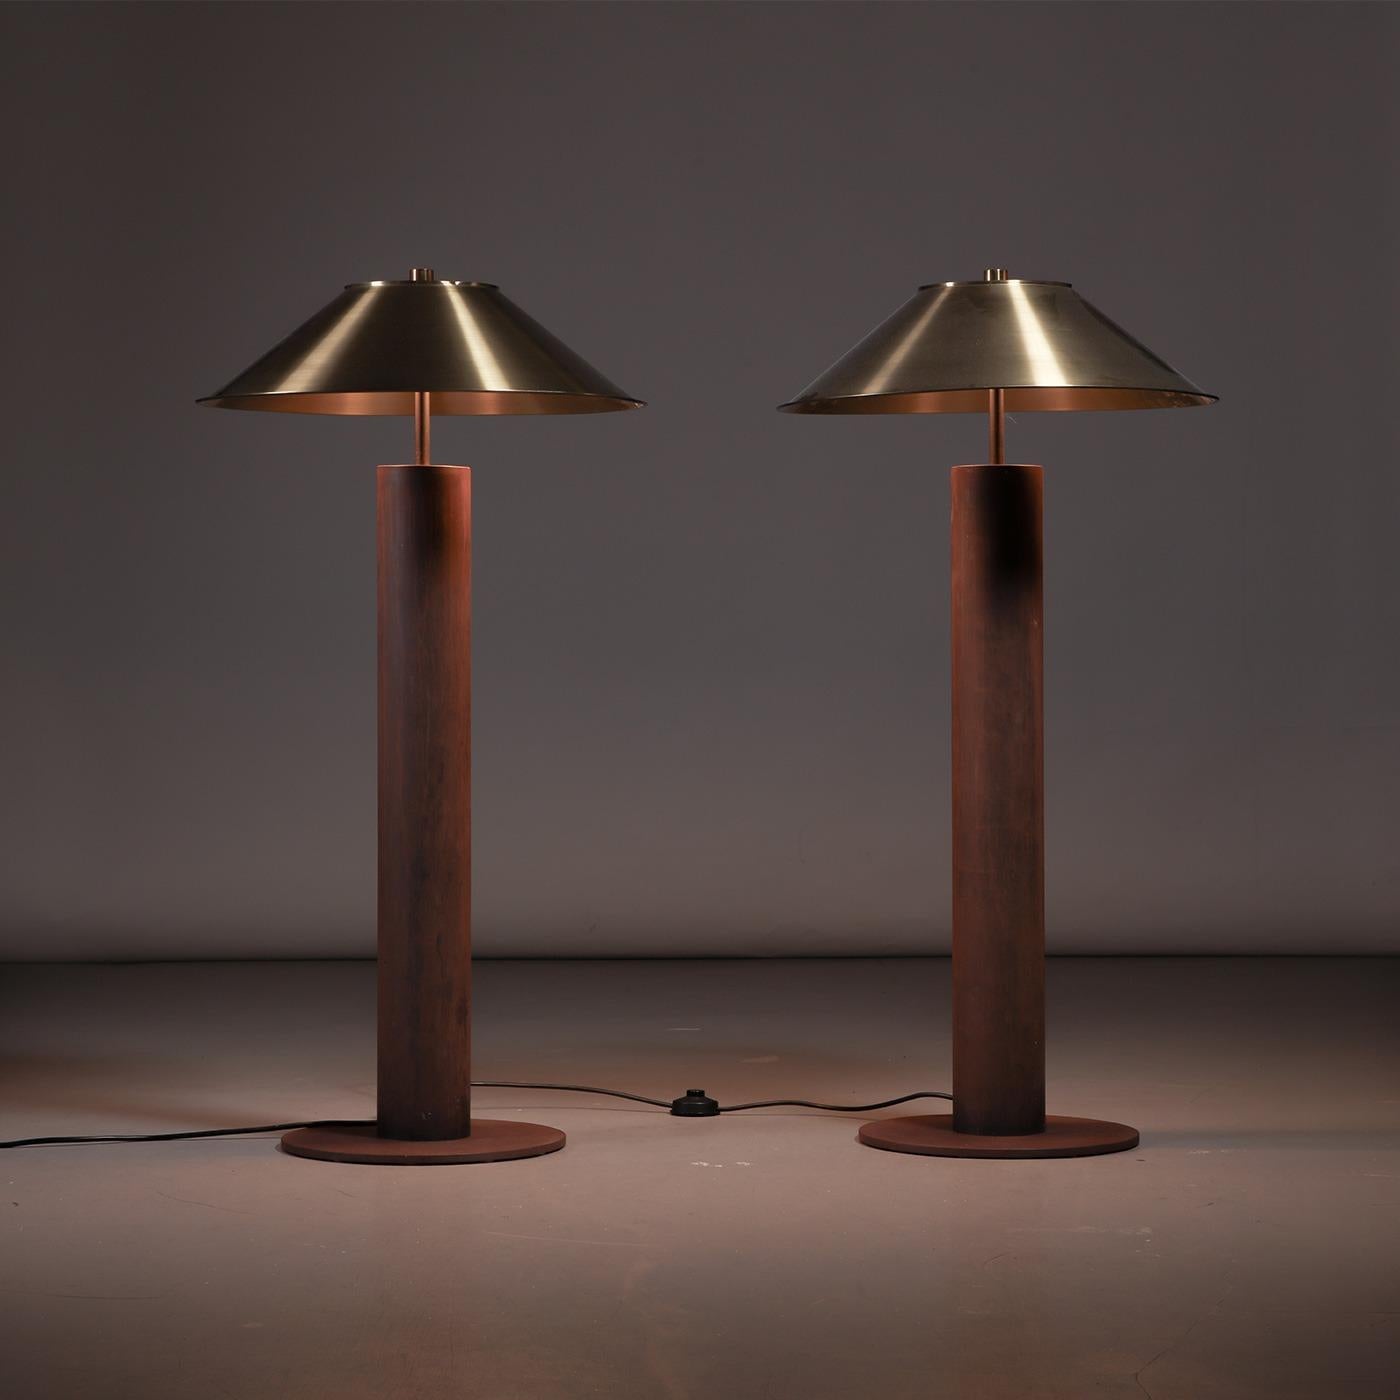 Pair of modernist floor lamps in weathering steel designed by Peter Preller for Tecta, Germany, 1980s.

Designed in the 1980s by German designer and interior architect Peter Preller, these floor lamps exude a sense of tranquility with their Zen-like